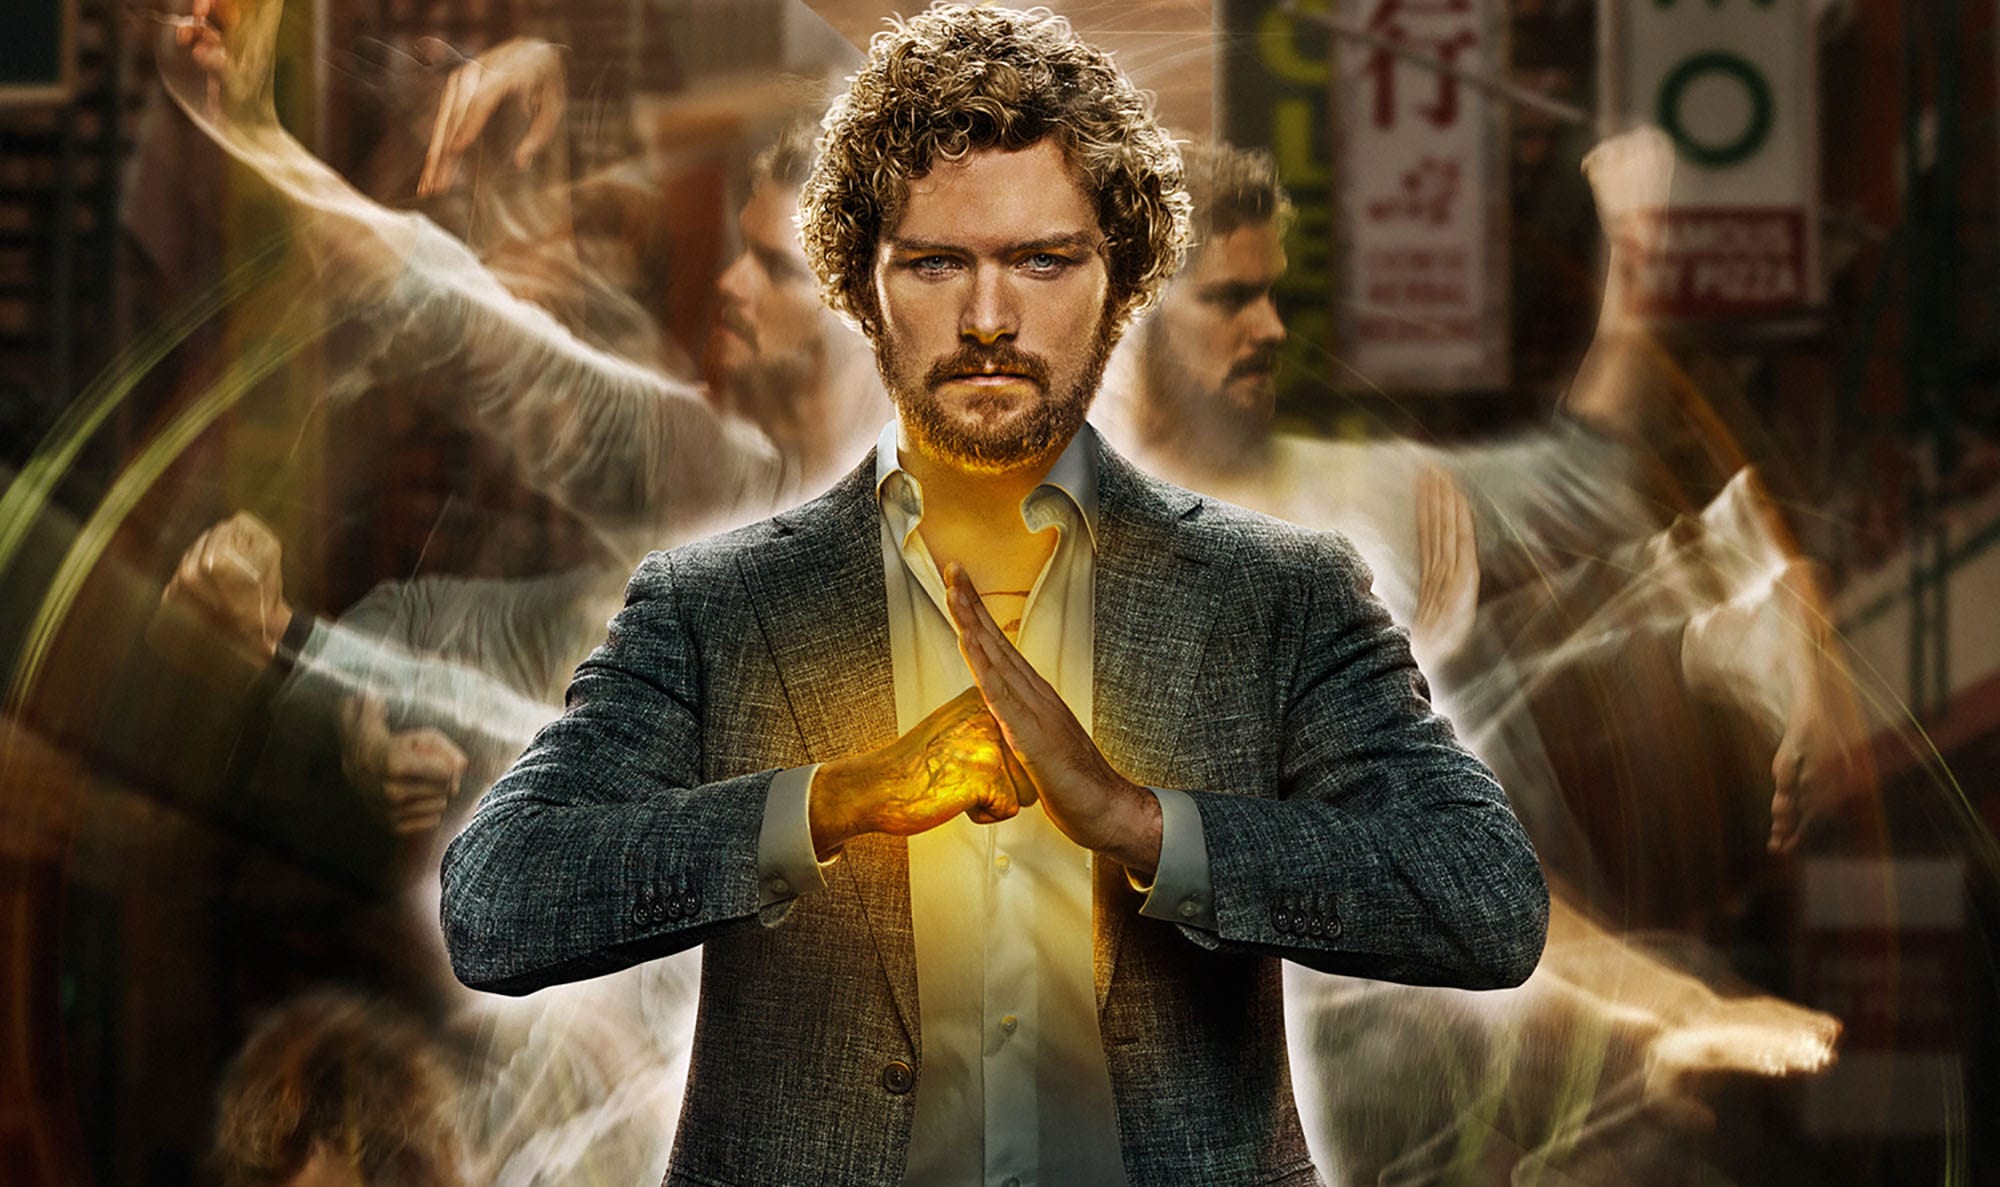 Billionaire Danny Rand (Finn Jones) returns to New York City after being missing for years, trying to reconnect with his past and his family legacy in 'Iron Fist'.